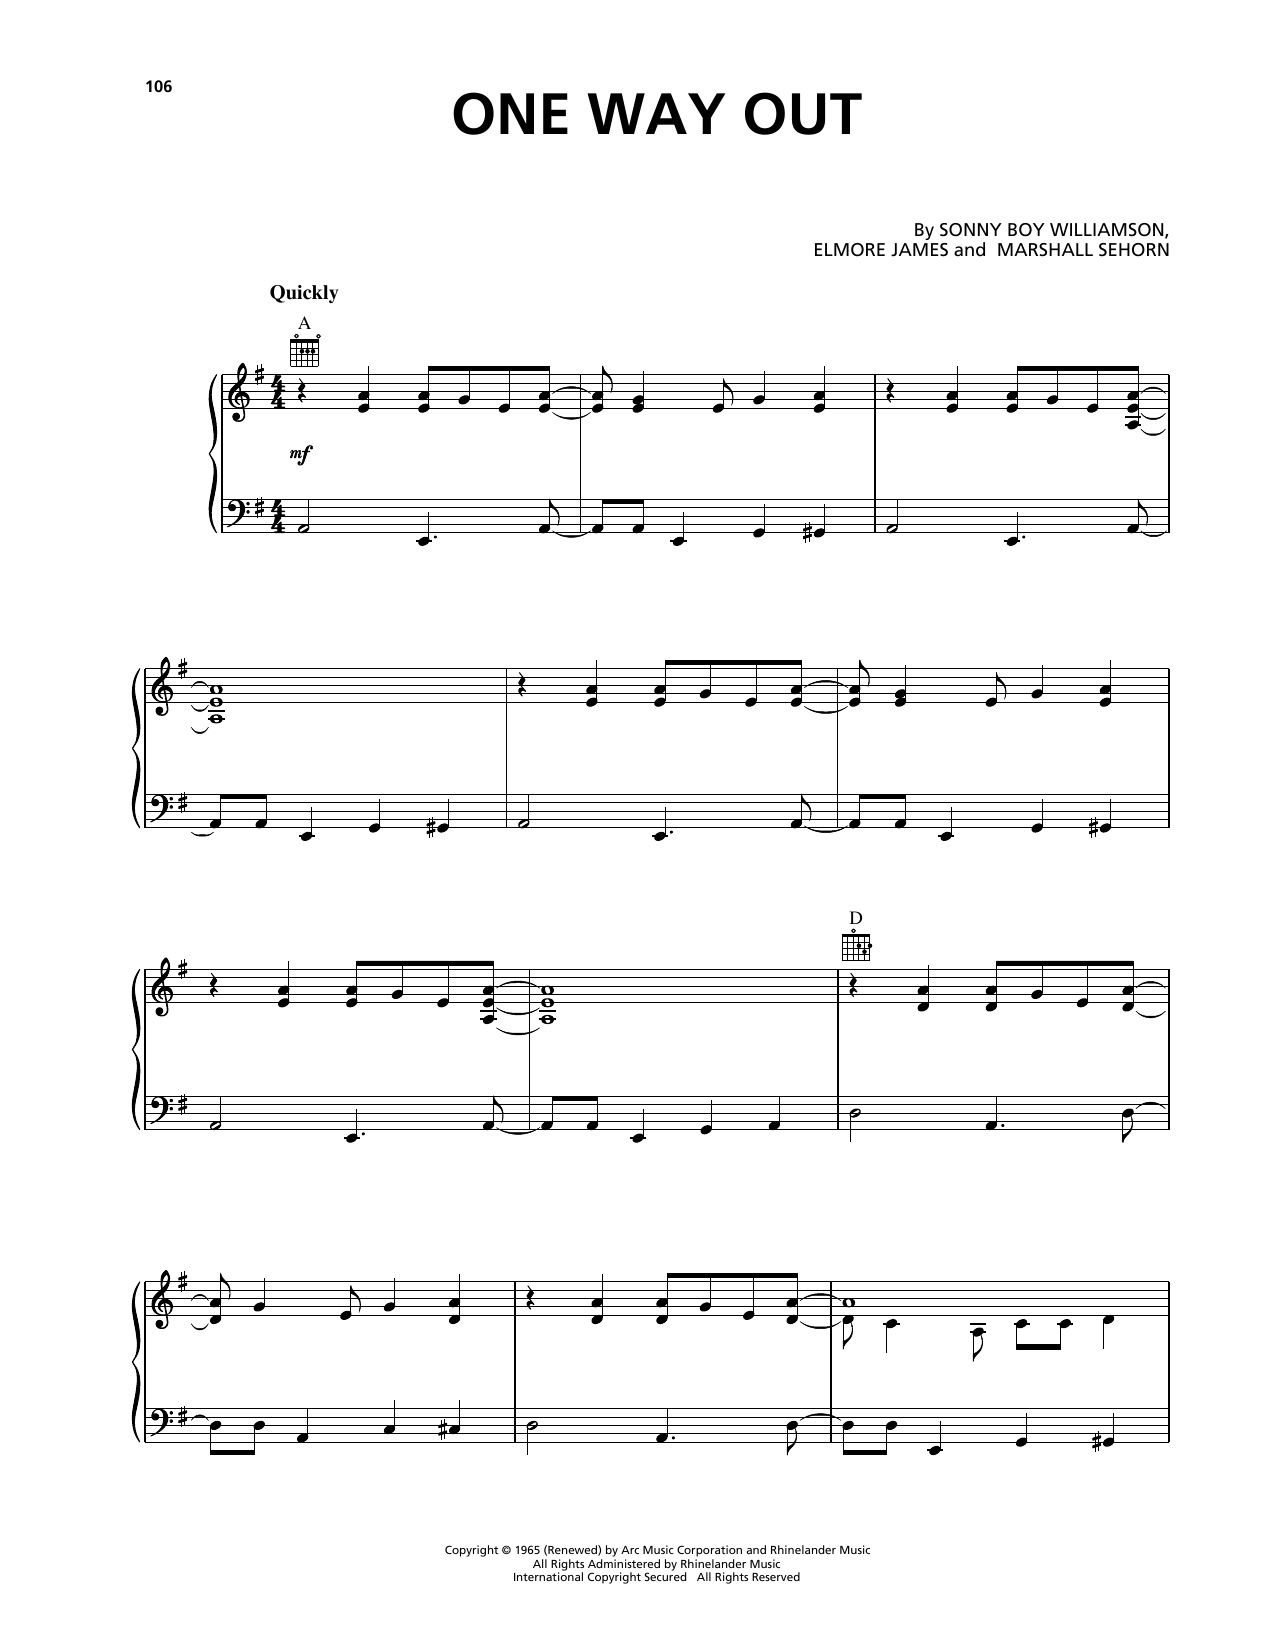 Download The Allman Brothers Band One Way Out Sheet Music